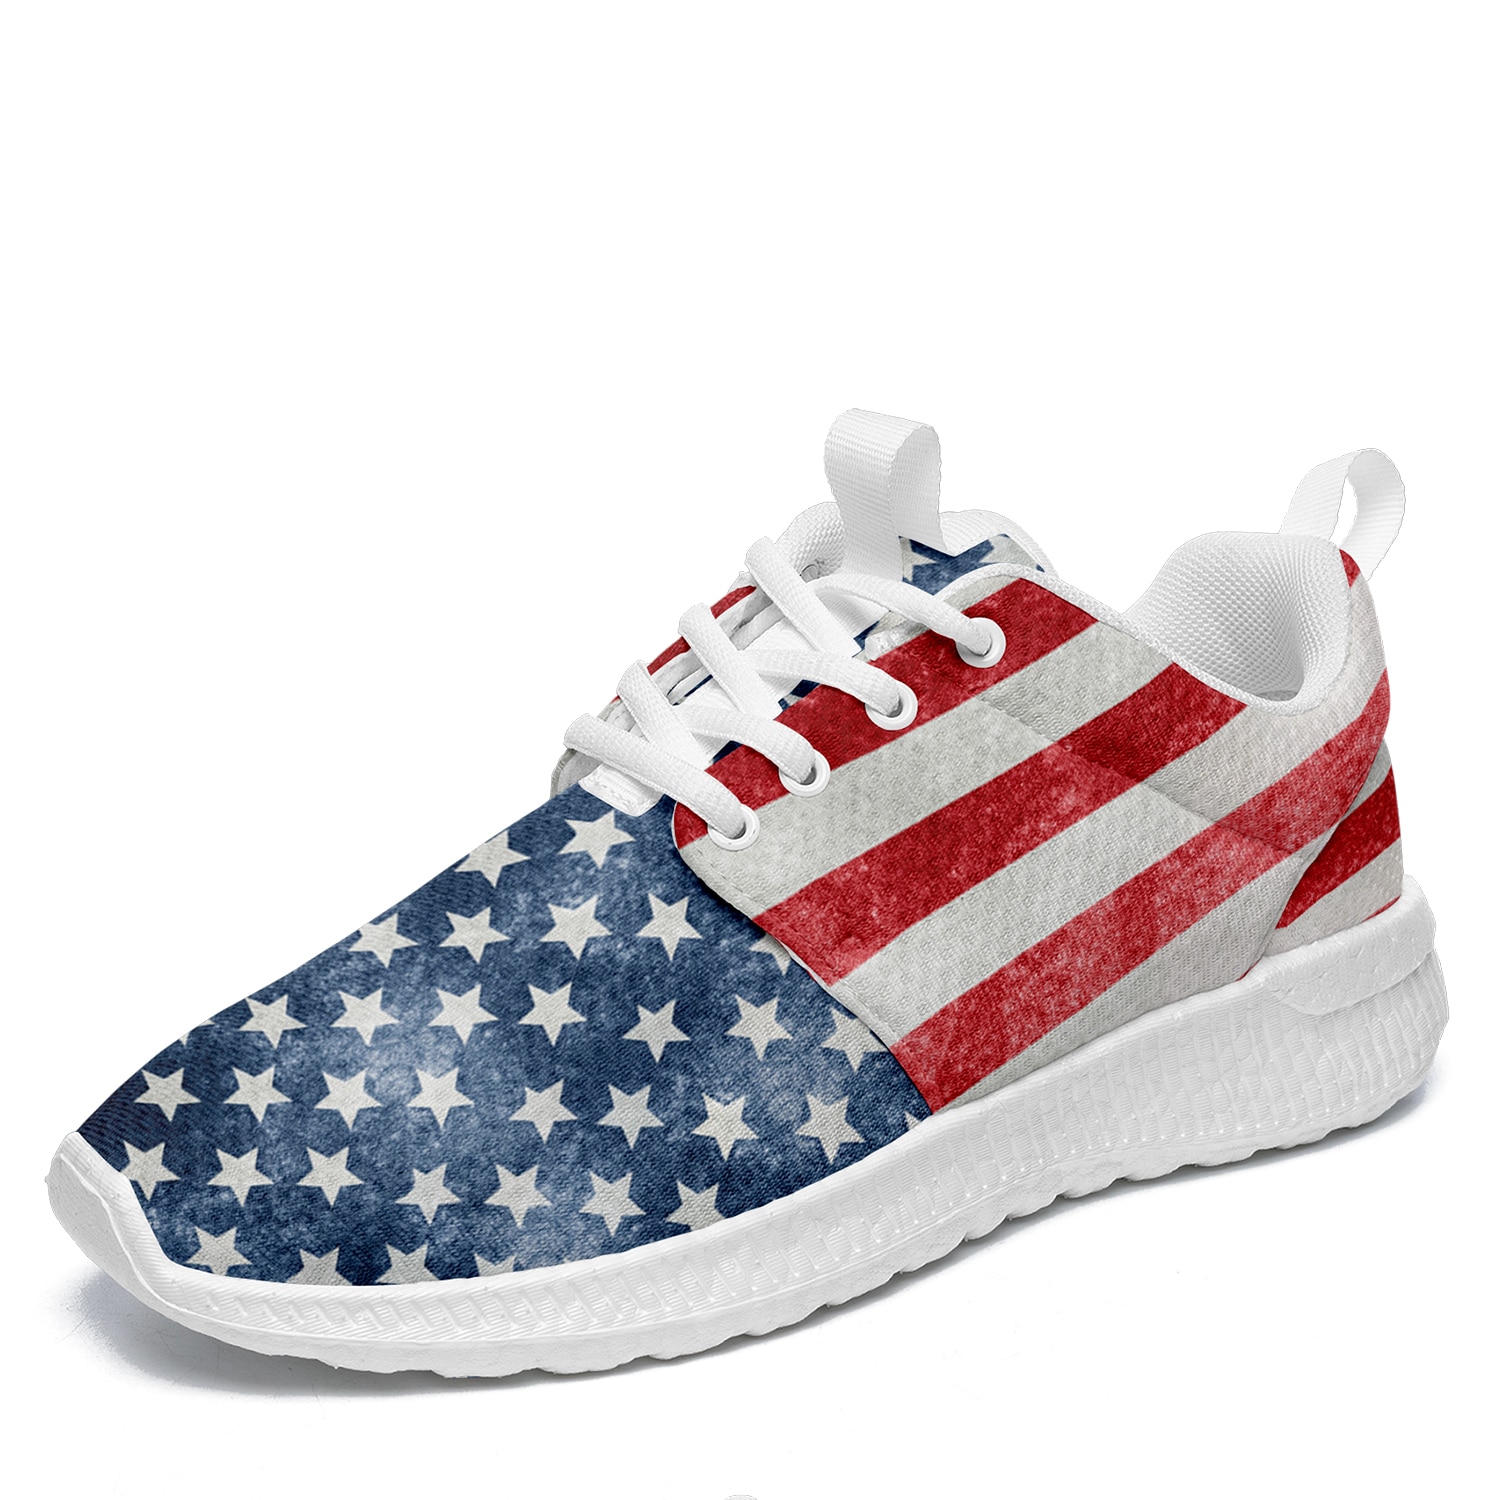 USA America Patriotic Flag Shoes Athletic Running Walking Shoes Drop shipping Print On Demand Slip-on Mens Lightweight Sneakers